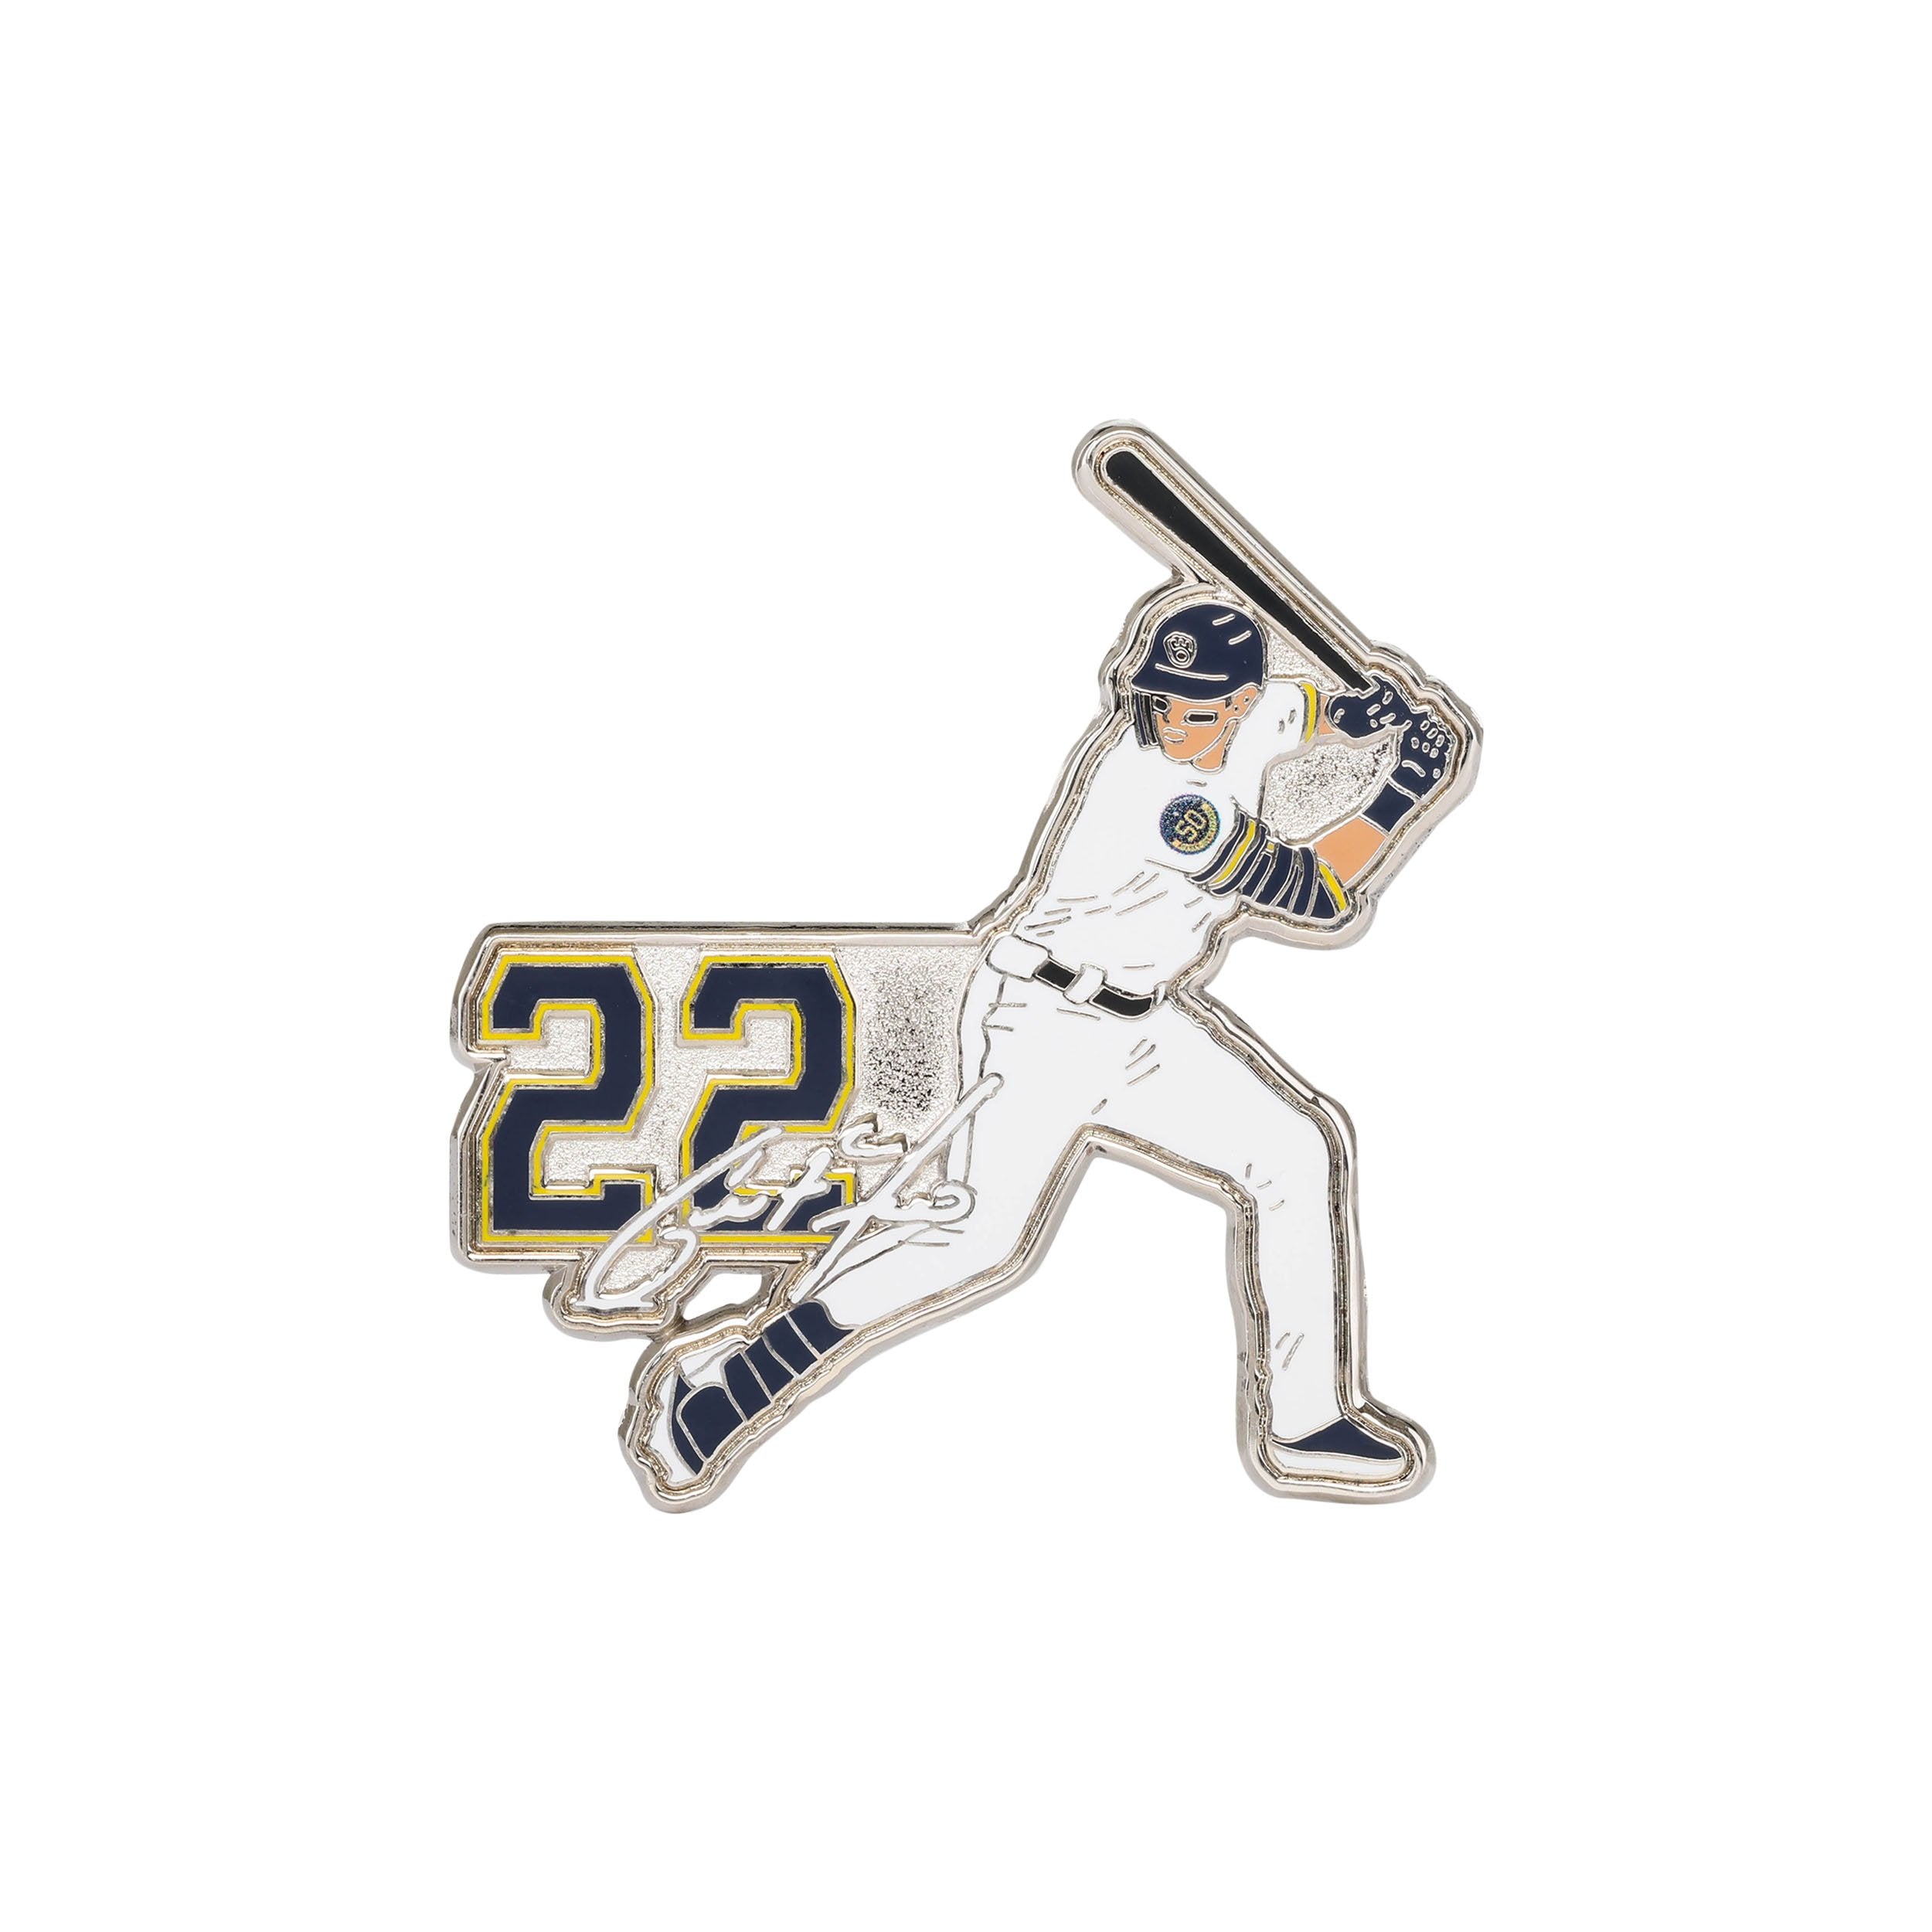 Pin on Christian yelich